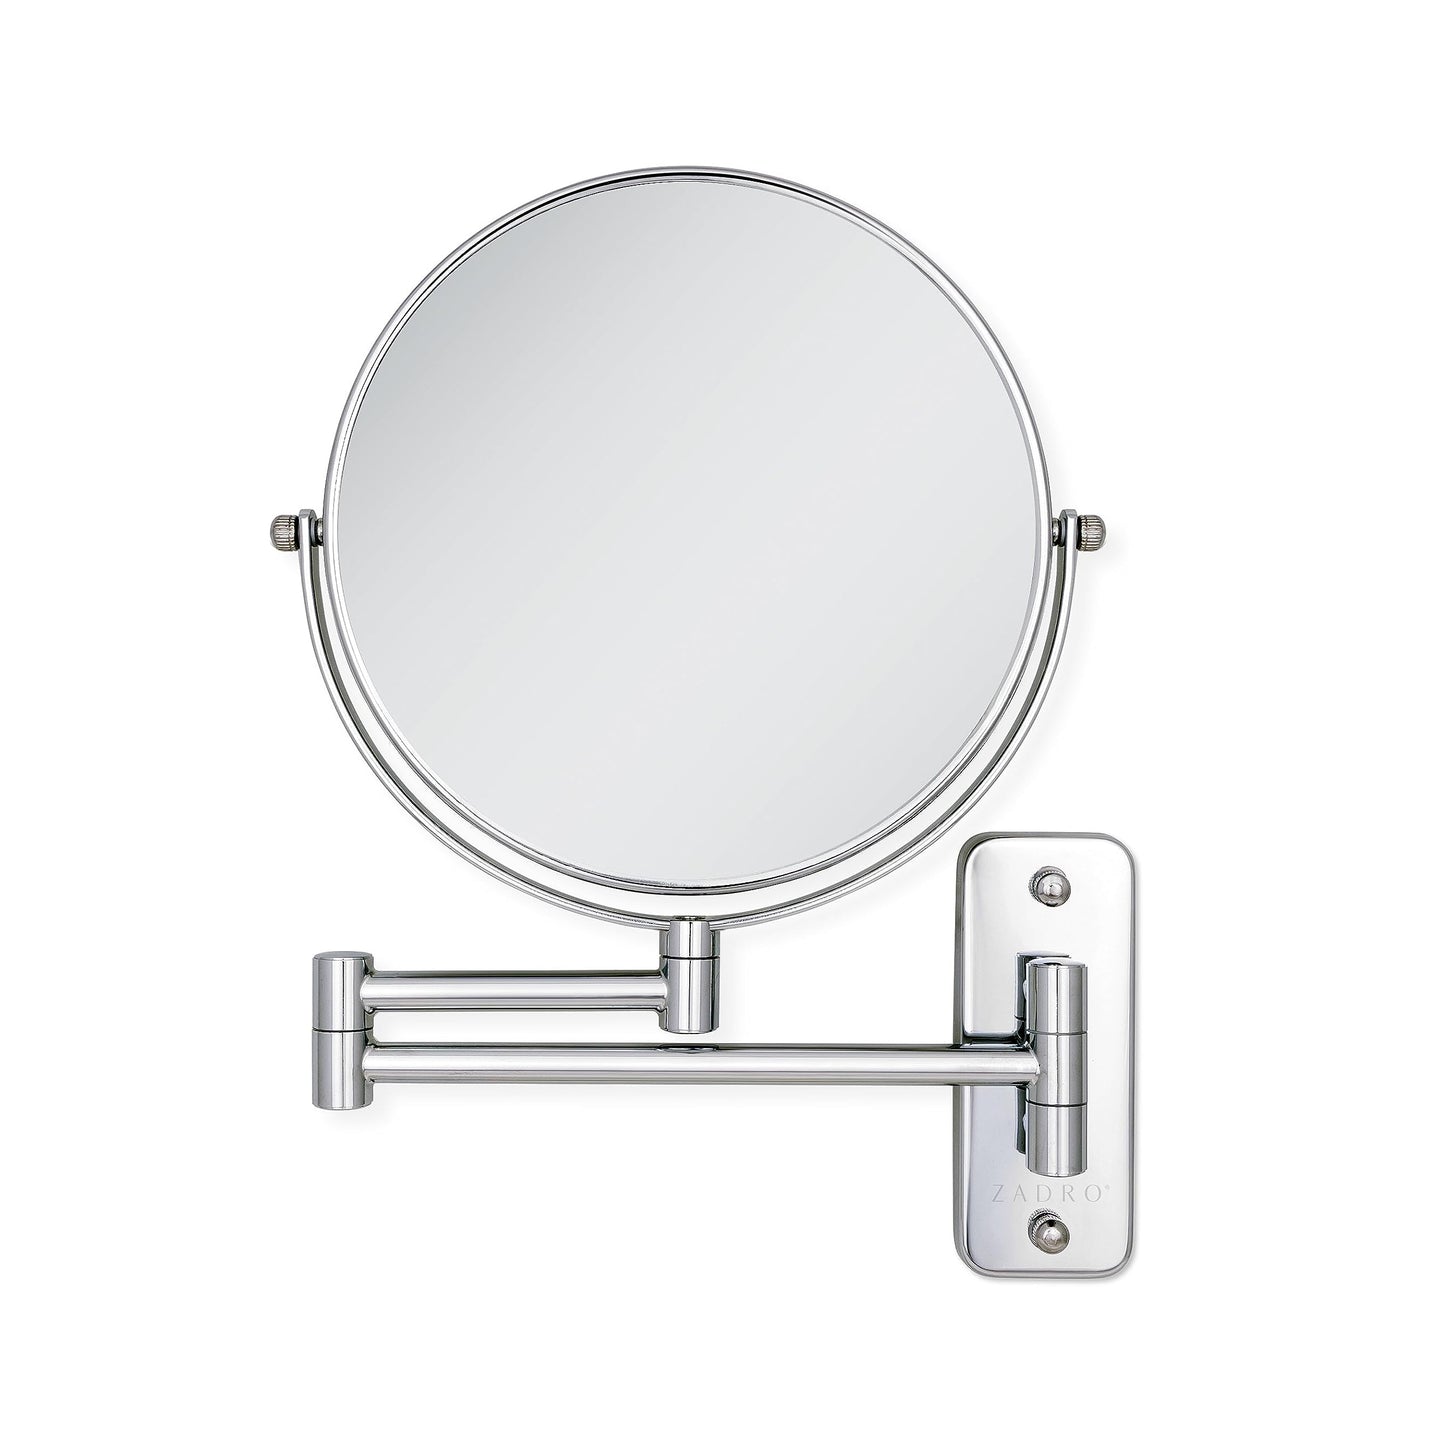 Zadro Wall Mounted Makeup Mirror with Magnification Folding Extendable Arm Vanity Mirrors for Wall Shower Shaving Mirror (7" Dia. Mirror, 8" Dia. Head, 8X/1X, Chrome)